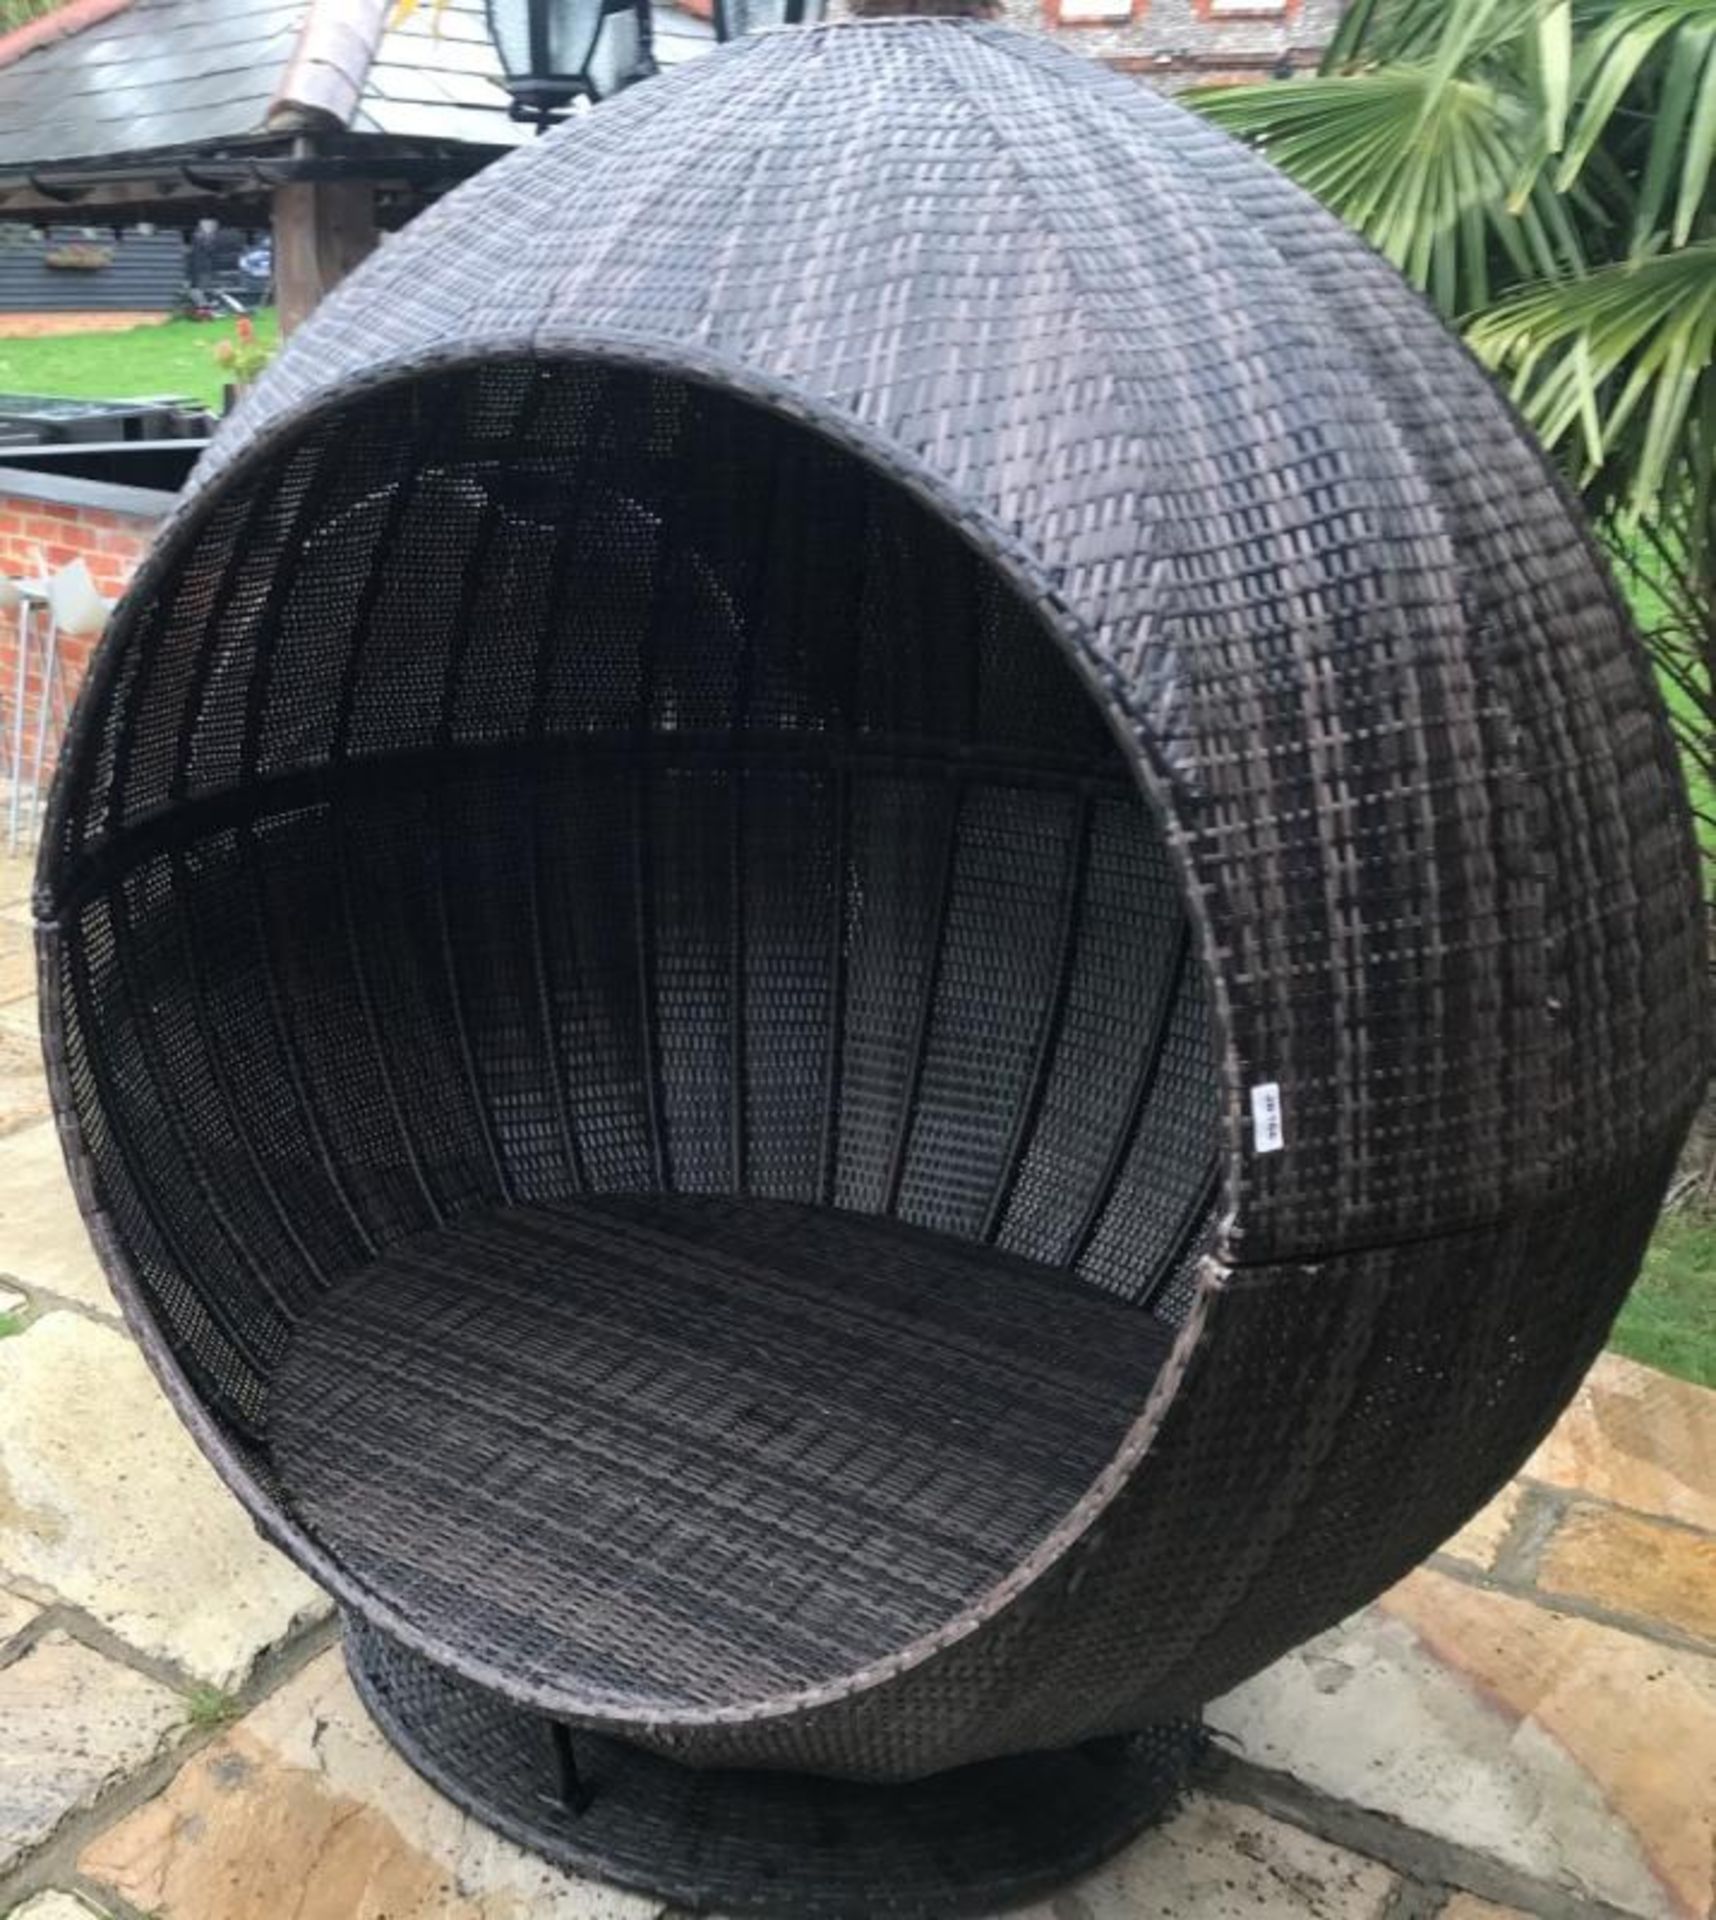 1 x Wicker/rattan Large Egg Shaped Daybed With Large Rounded Cushion Mat - Ref: JB166 - Pre-Owned - - Image 2 of 4